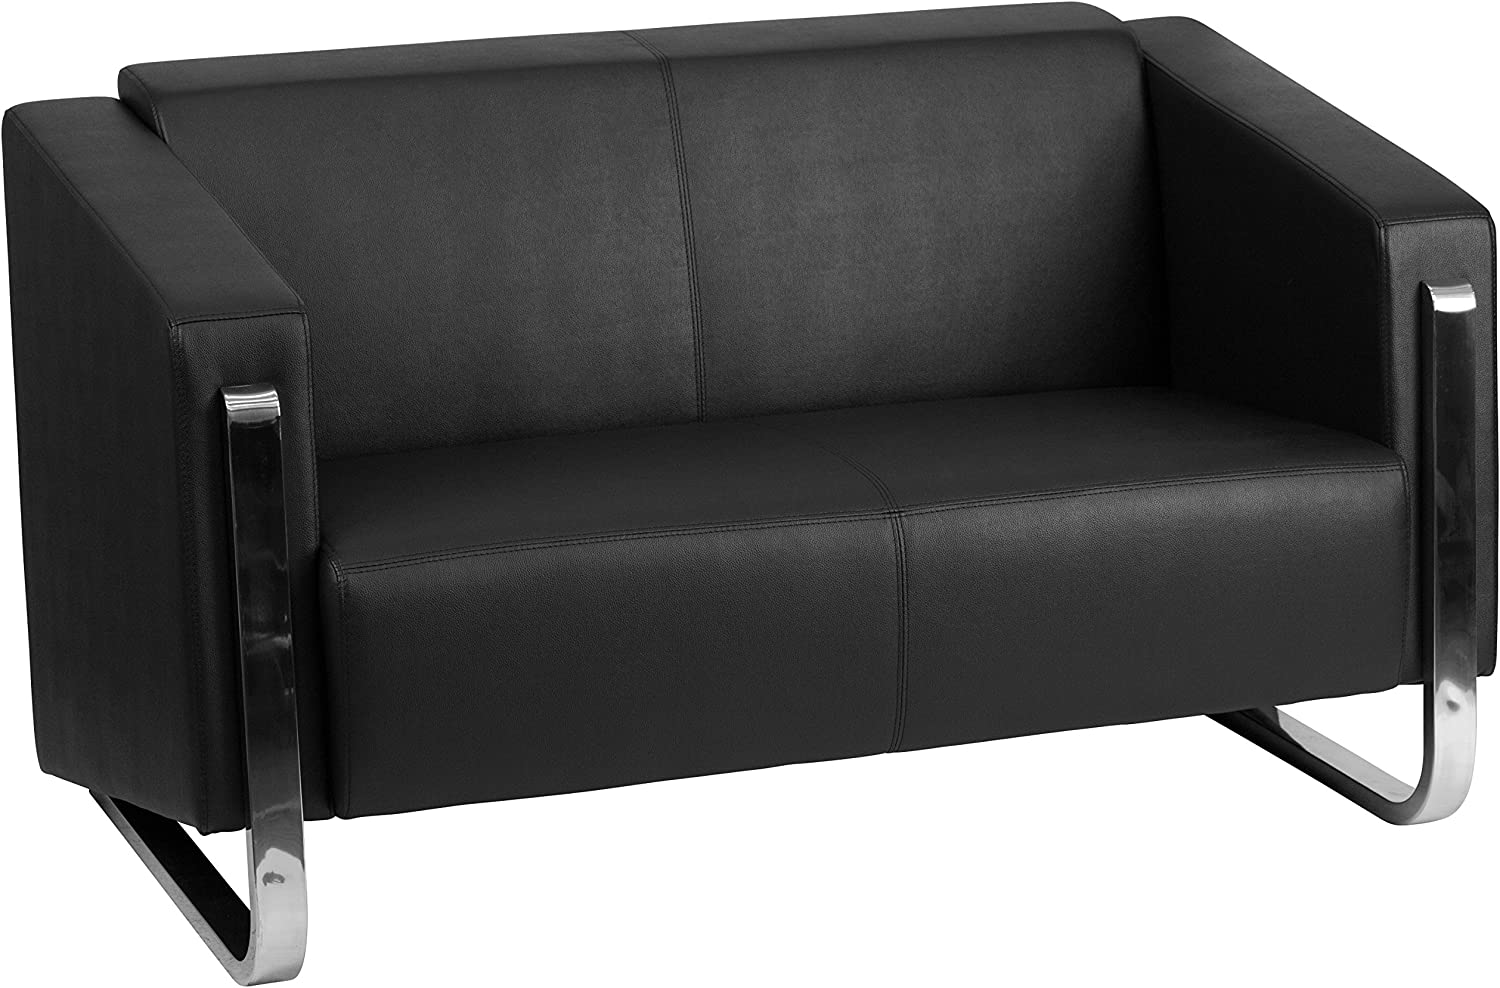 Flash Furniture HERCULES Gallant Series Contemporary Black LeatherSoft Loveseat with Stainless Steel Frame